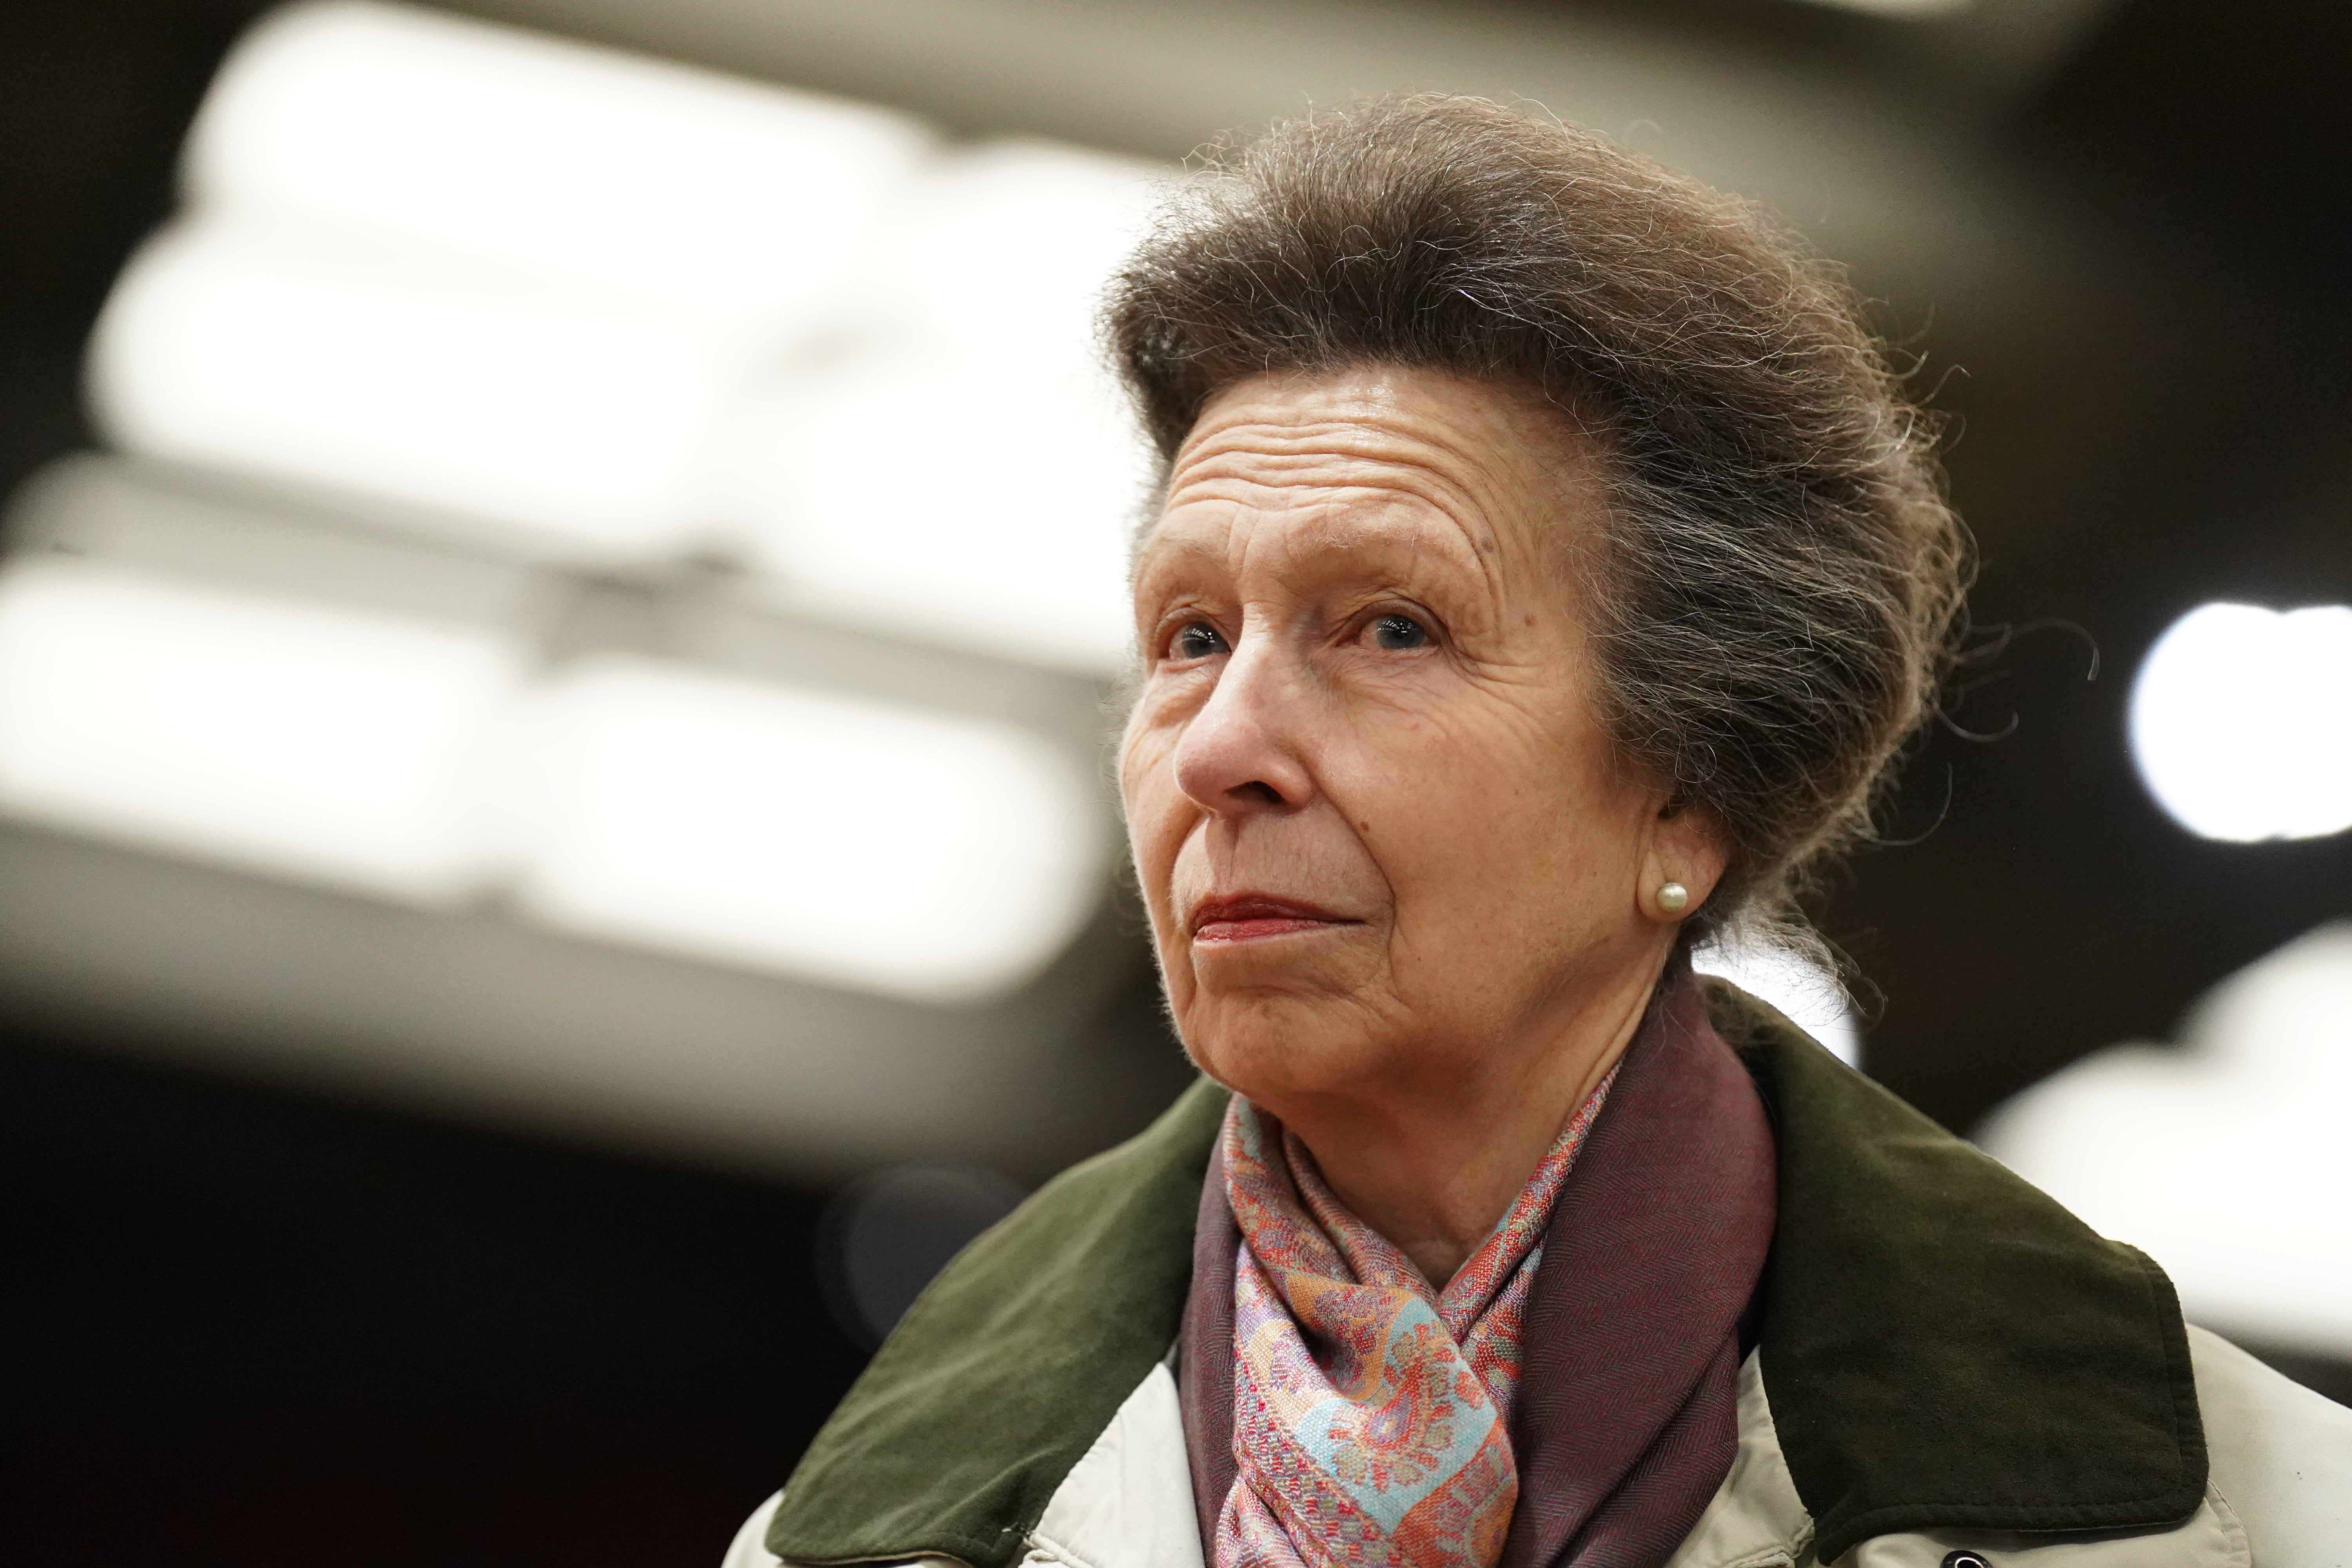 The Princess Royal has attended the most engagements of any royal this year – 250, to be exact.